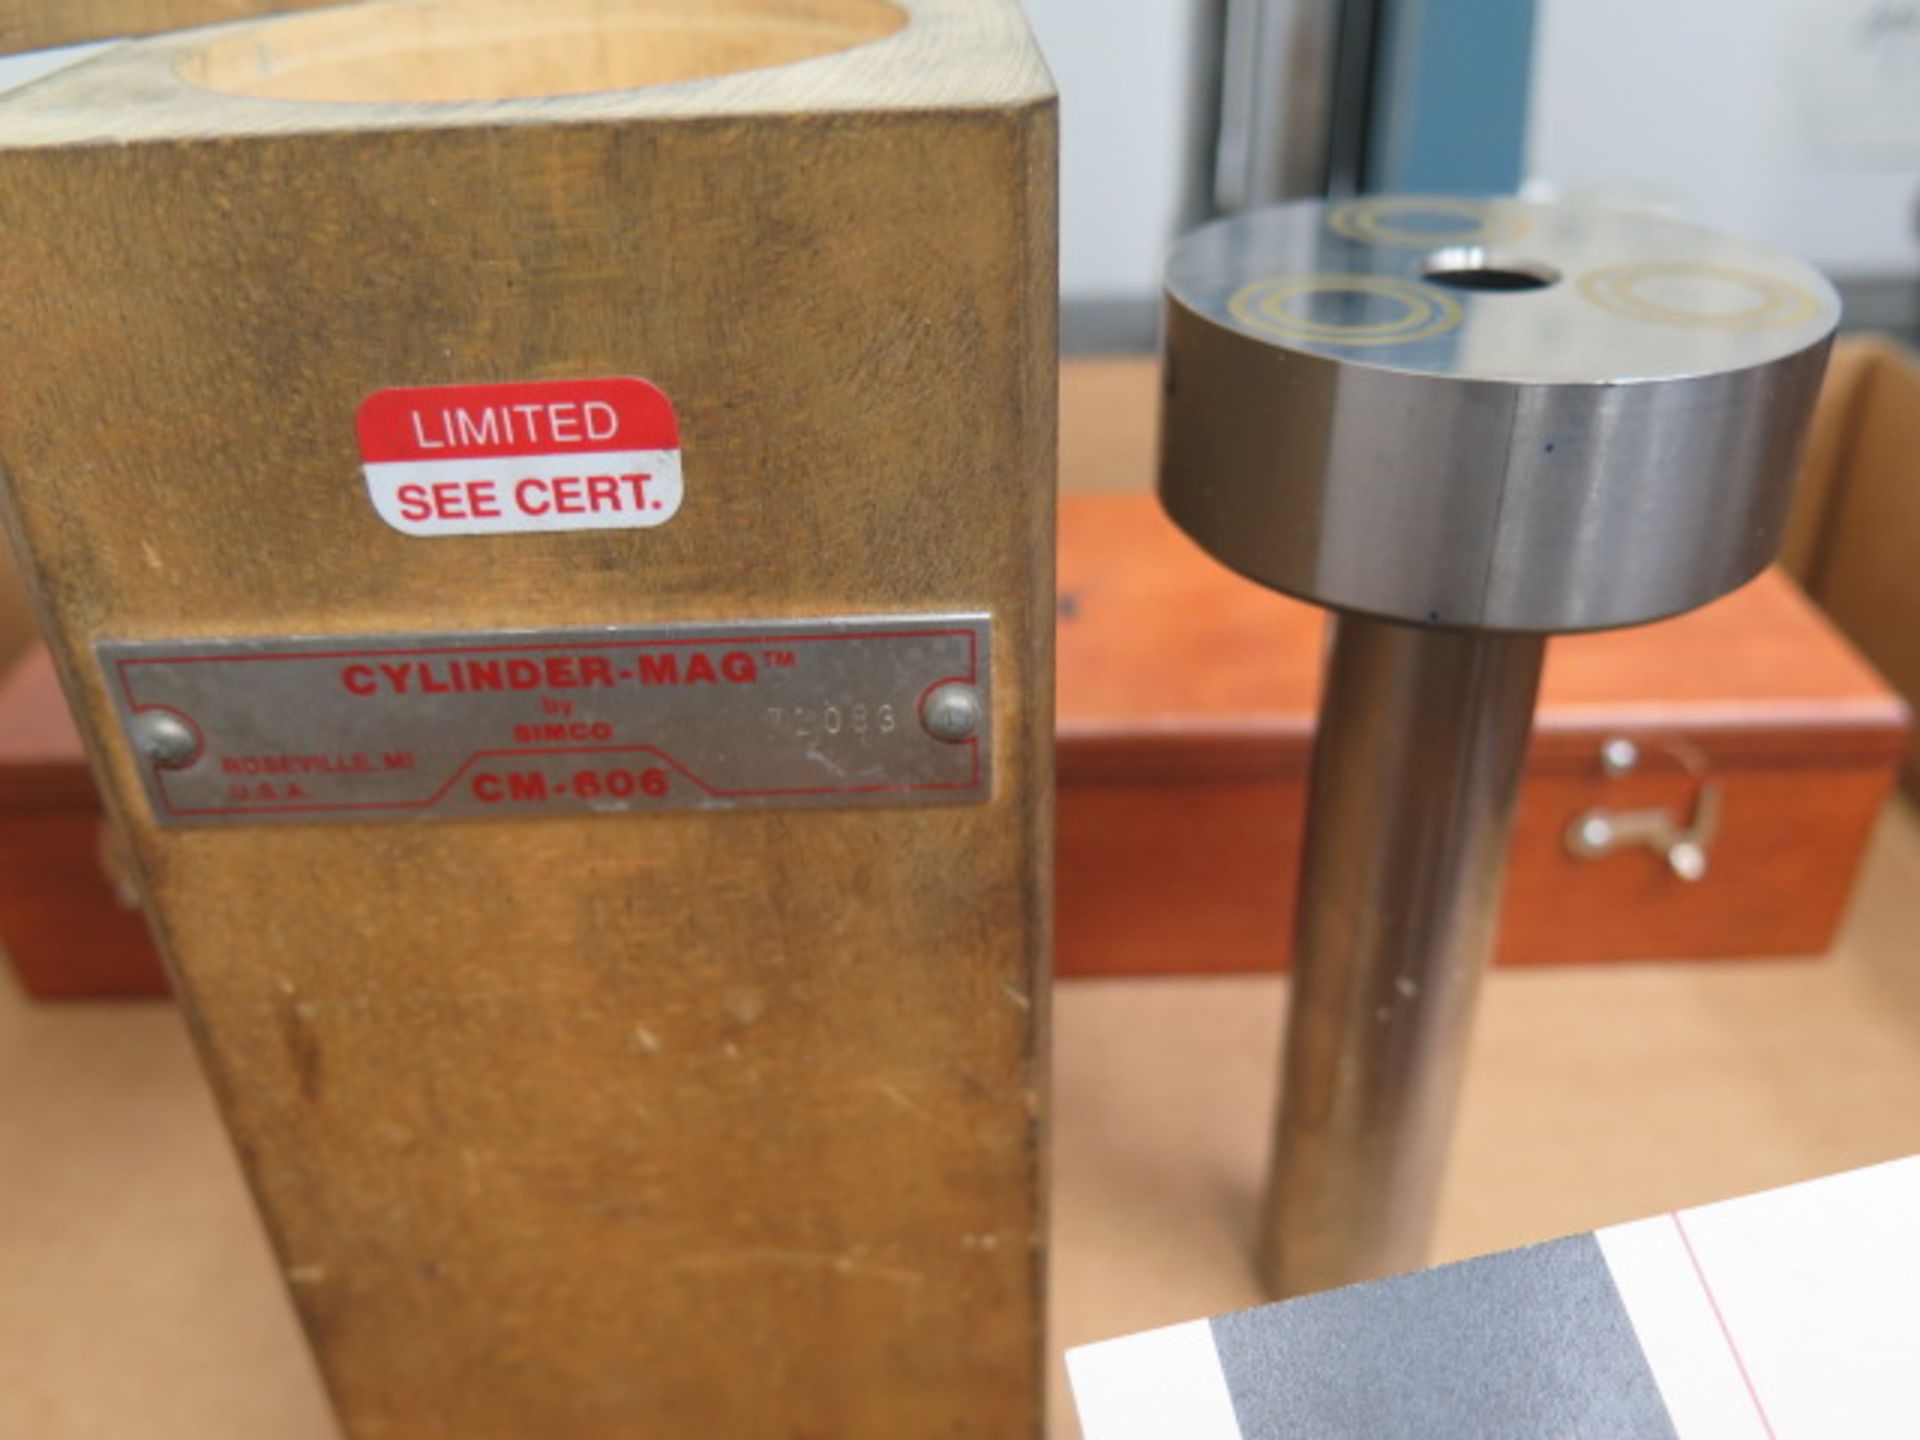 Starrett 12" Master Level and Simco CM-606 "Cylinder-Mag" Cylindrical Square - Image 4 of 5